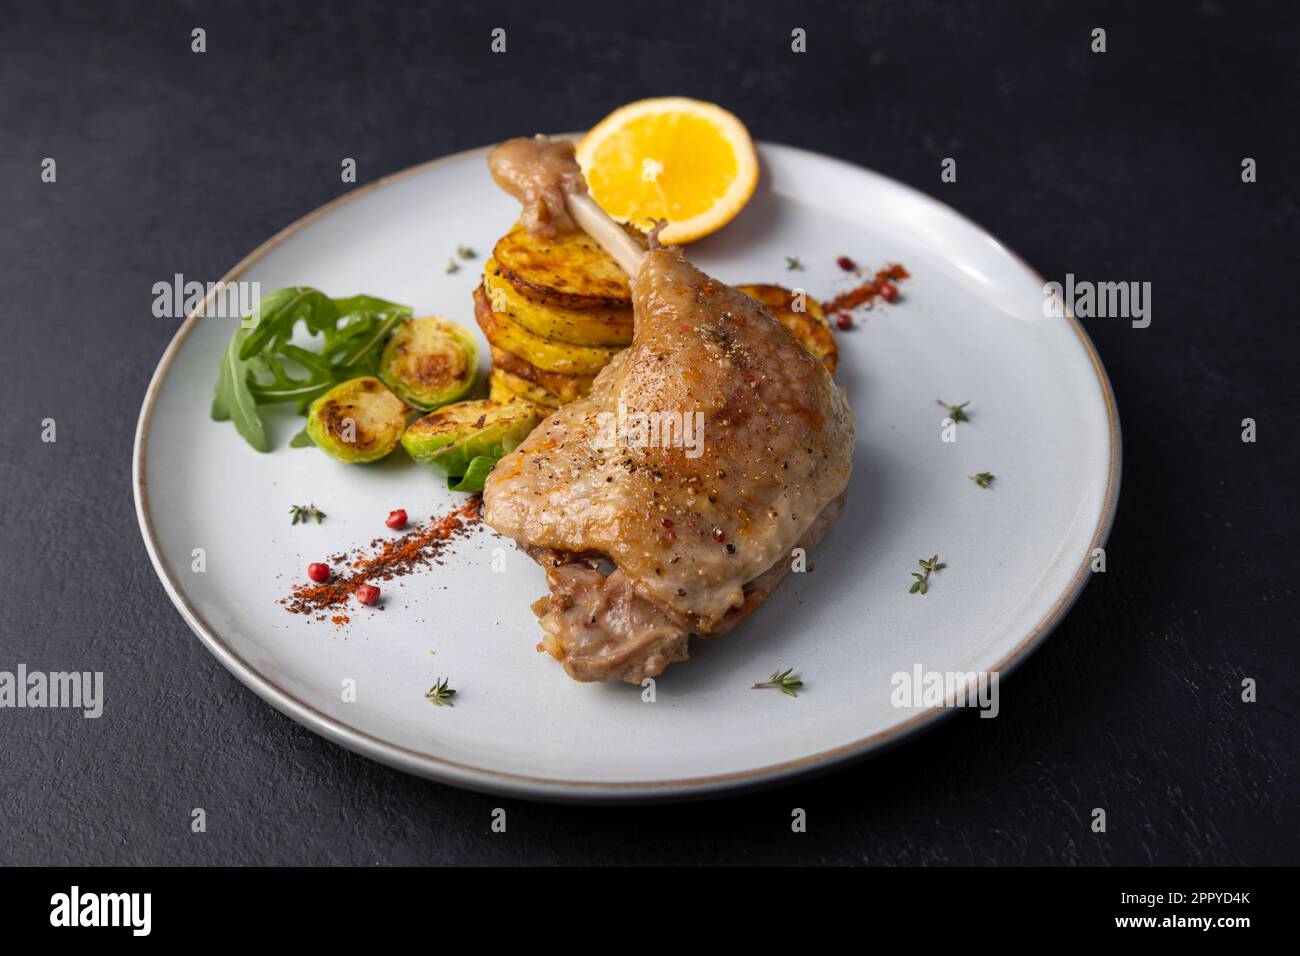 Duck leg confit with Brussels sprouts, baked potatoes, thyme and orange. Traditional French cuisine. Selective focus, close-up, black background. Stock Photo